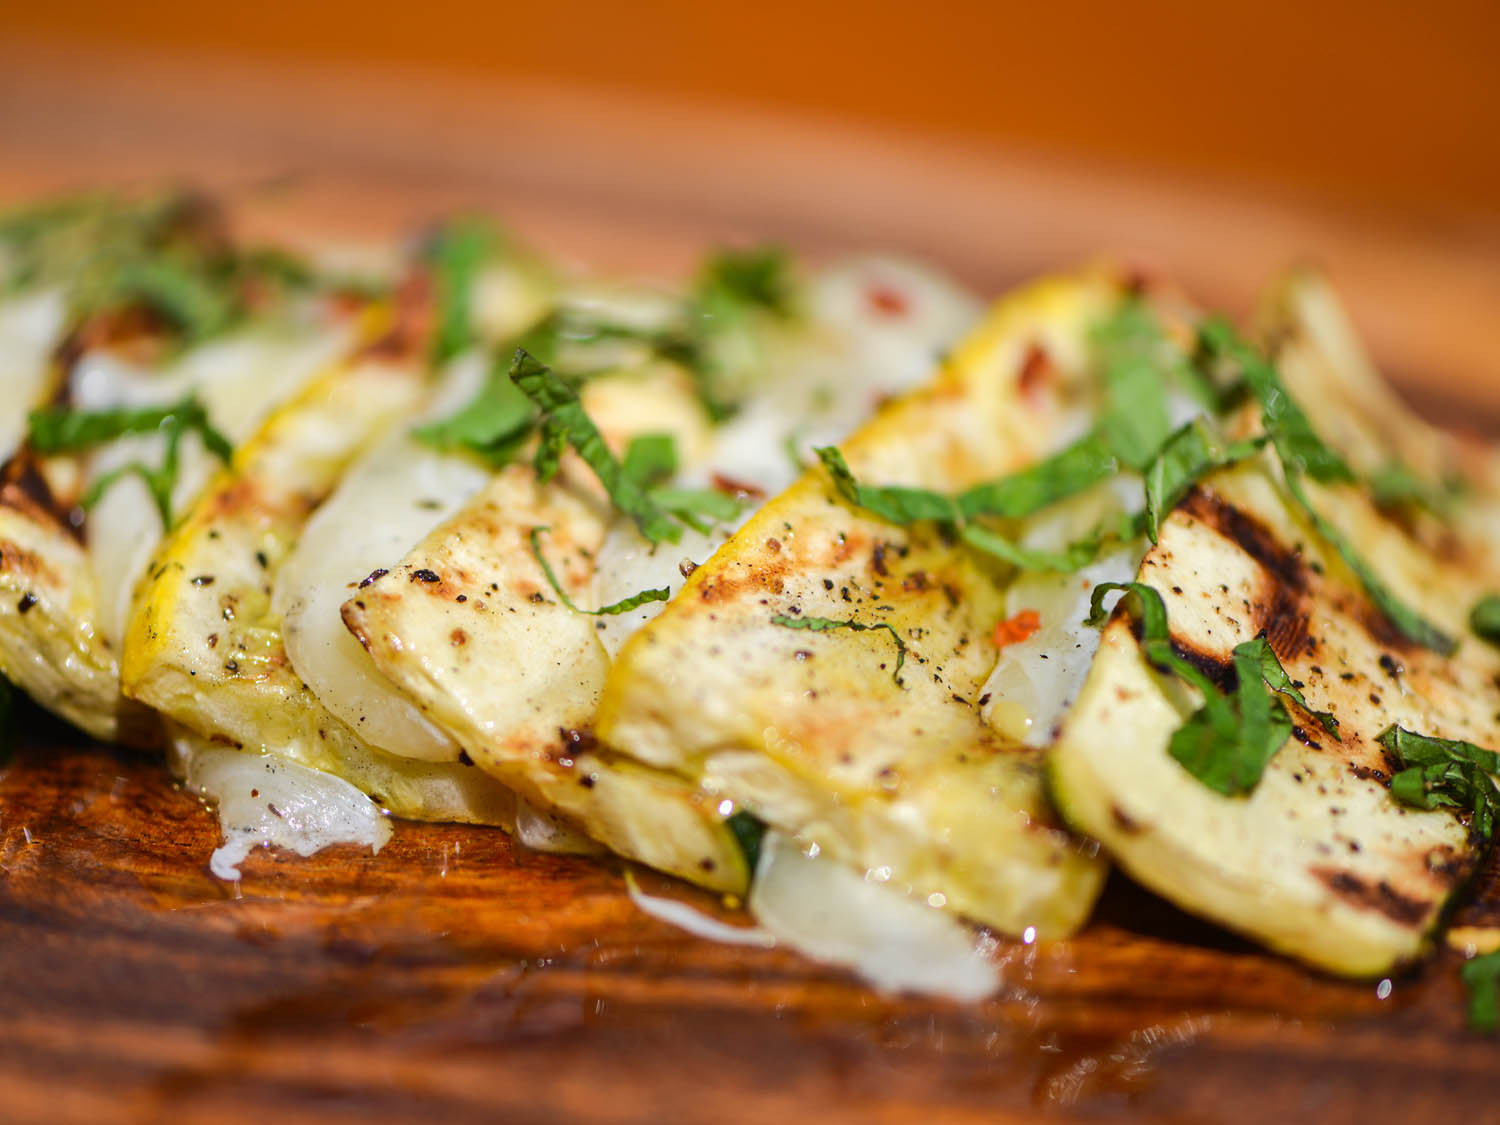 Summer Squash Recipes
 Grilled Summer Squash and Kasseri Cheese With Lemon and